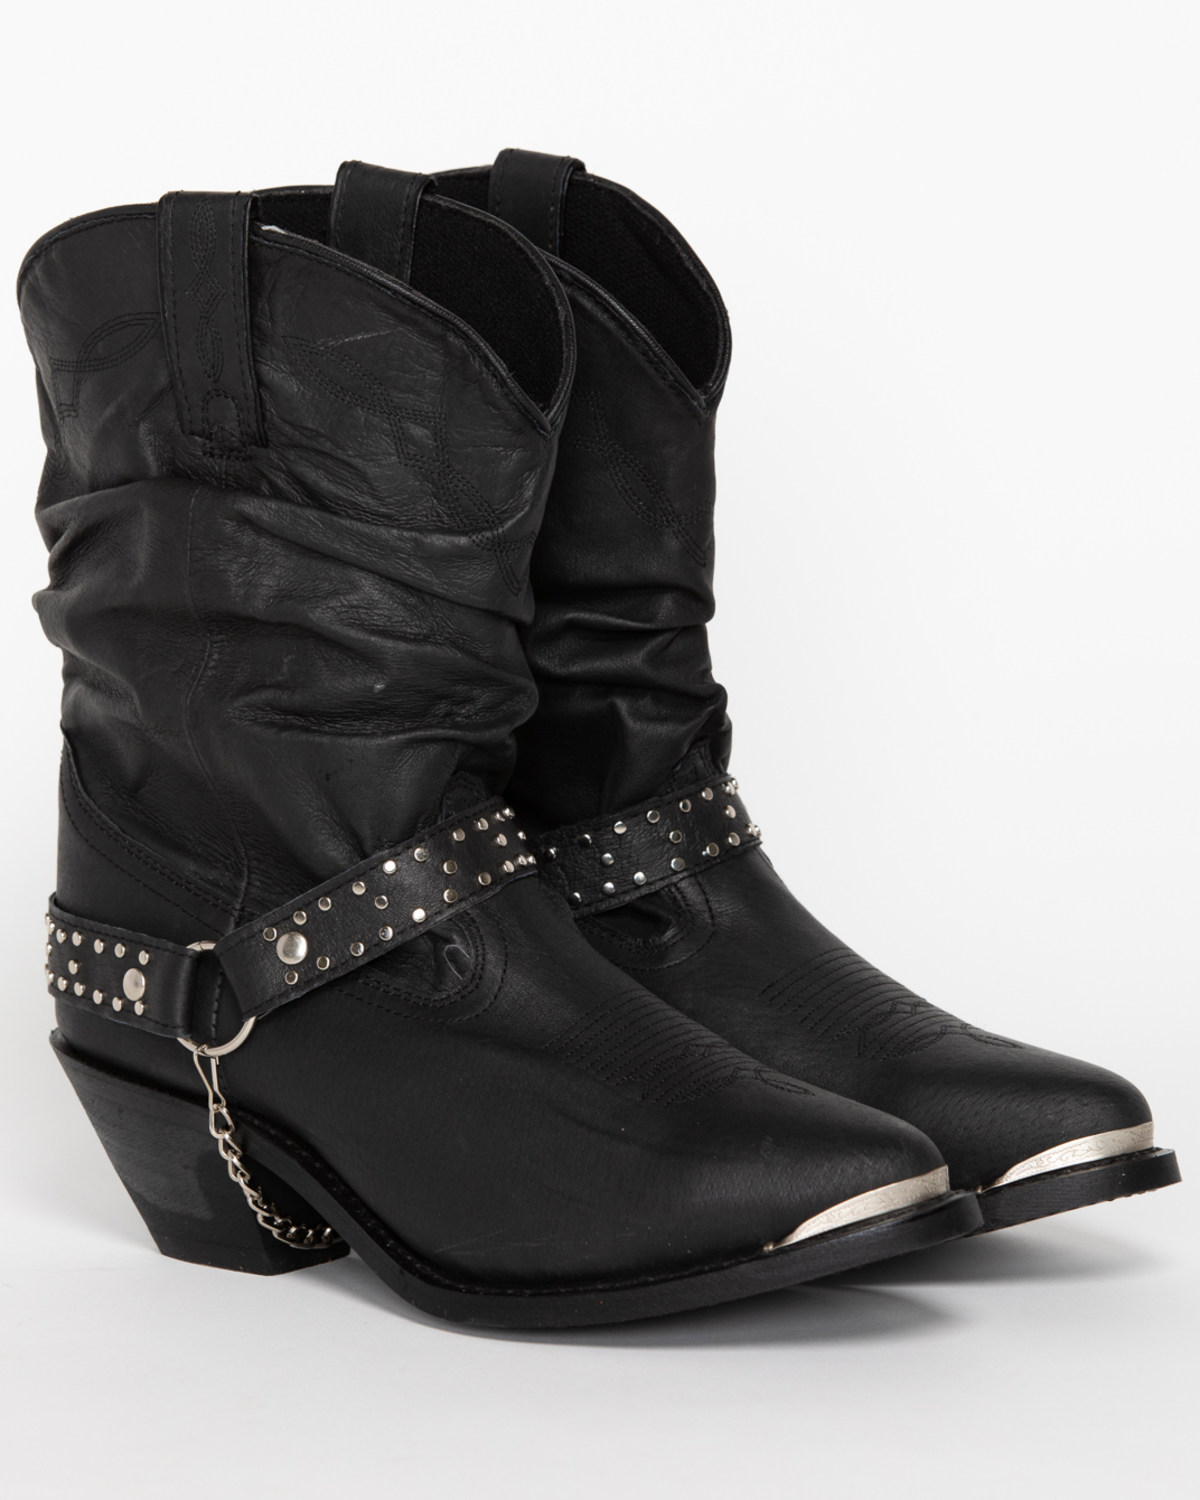 Slouch Harness Fashion Boots | Boot Barn